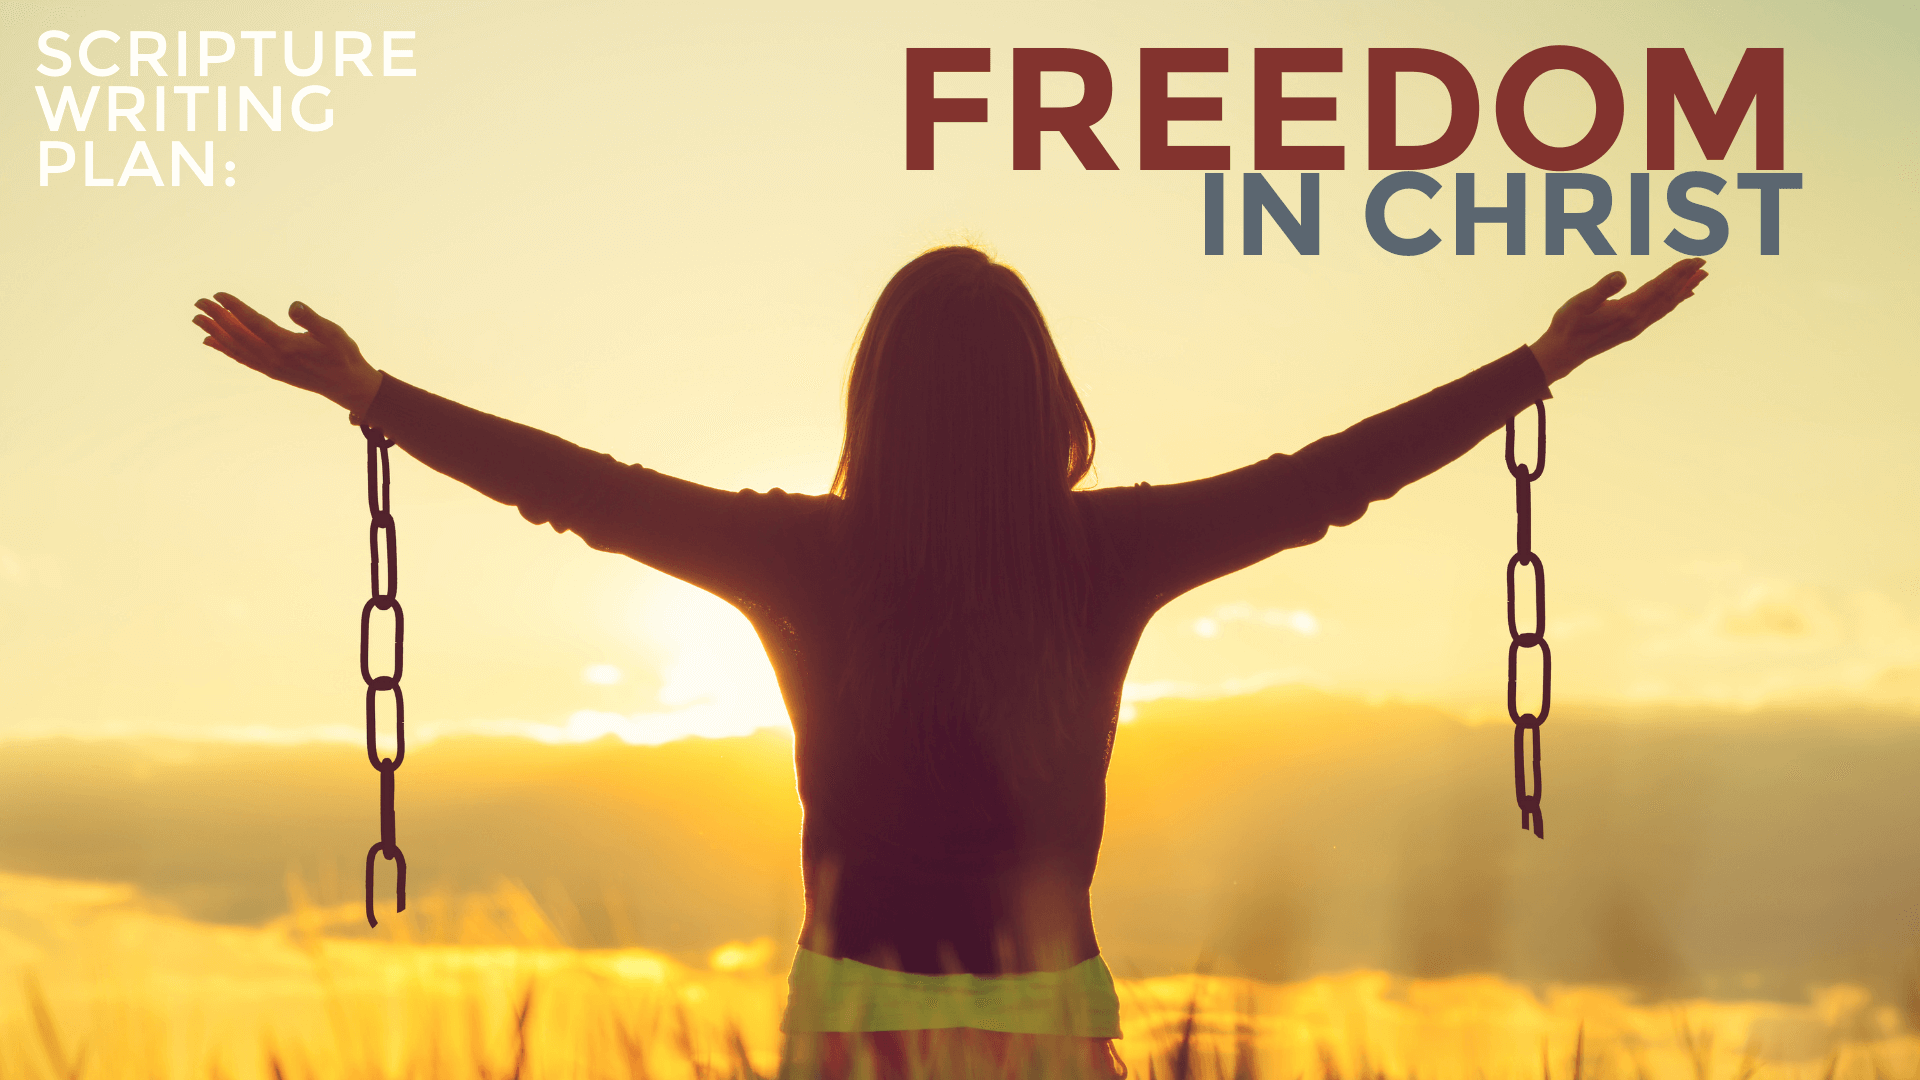 Freedom in Christ 1920x1080